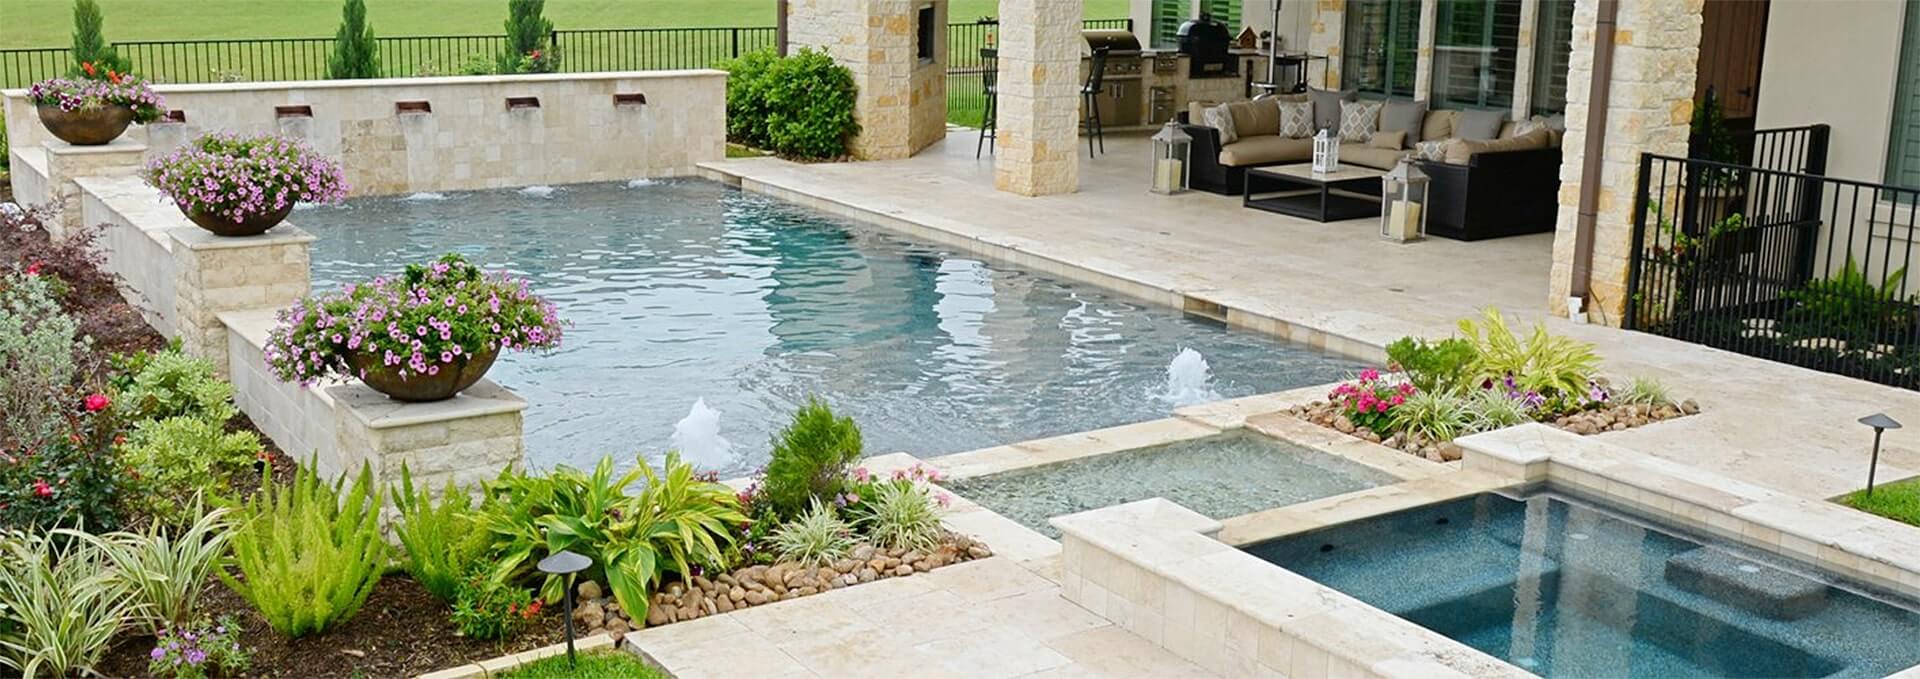 Enjoy Superior New Pools Designed and Installed by Reputable Installers in Florida